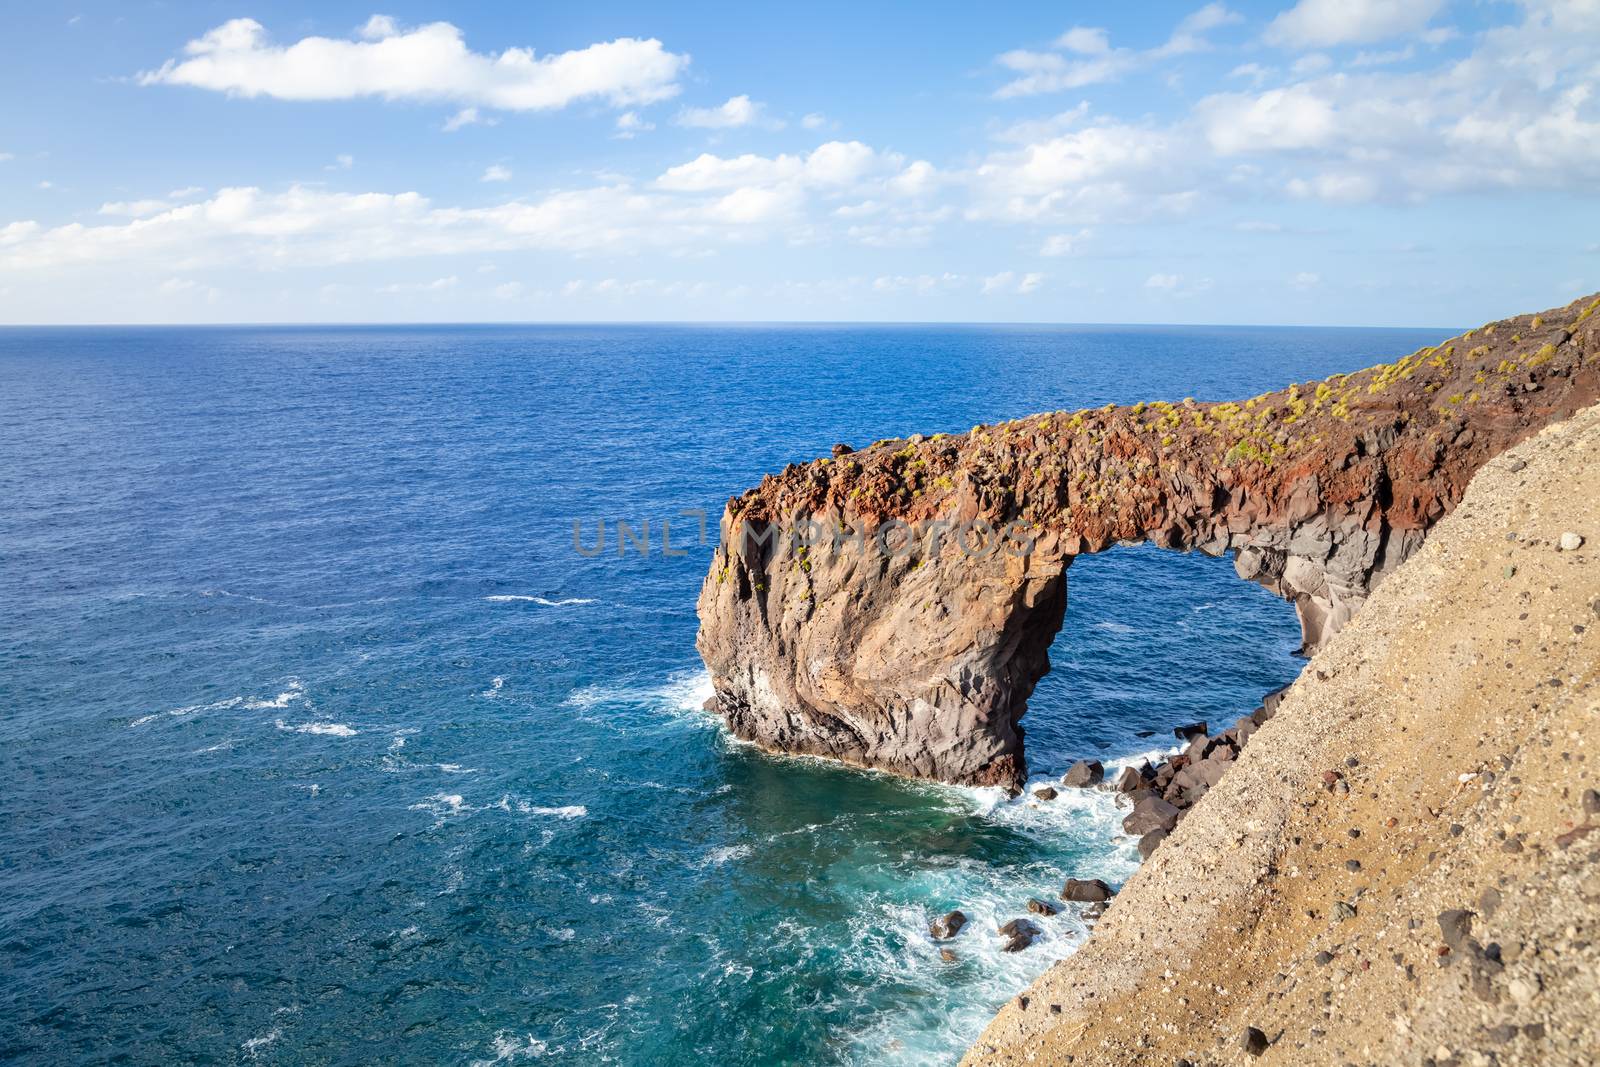 An image of the famous rock arch Punta Perciato